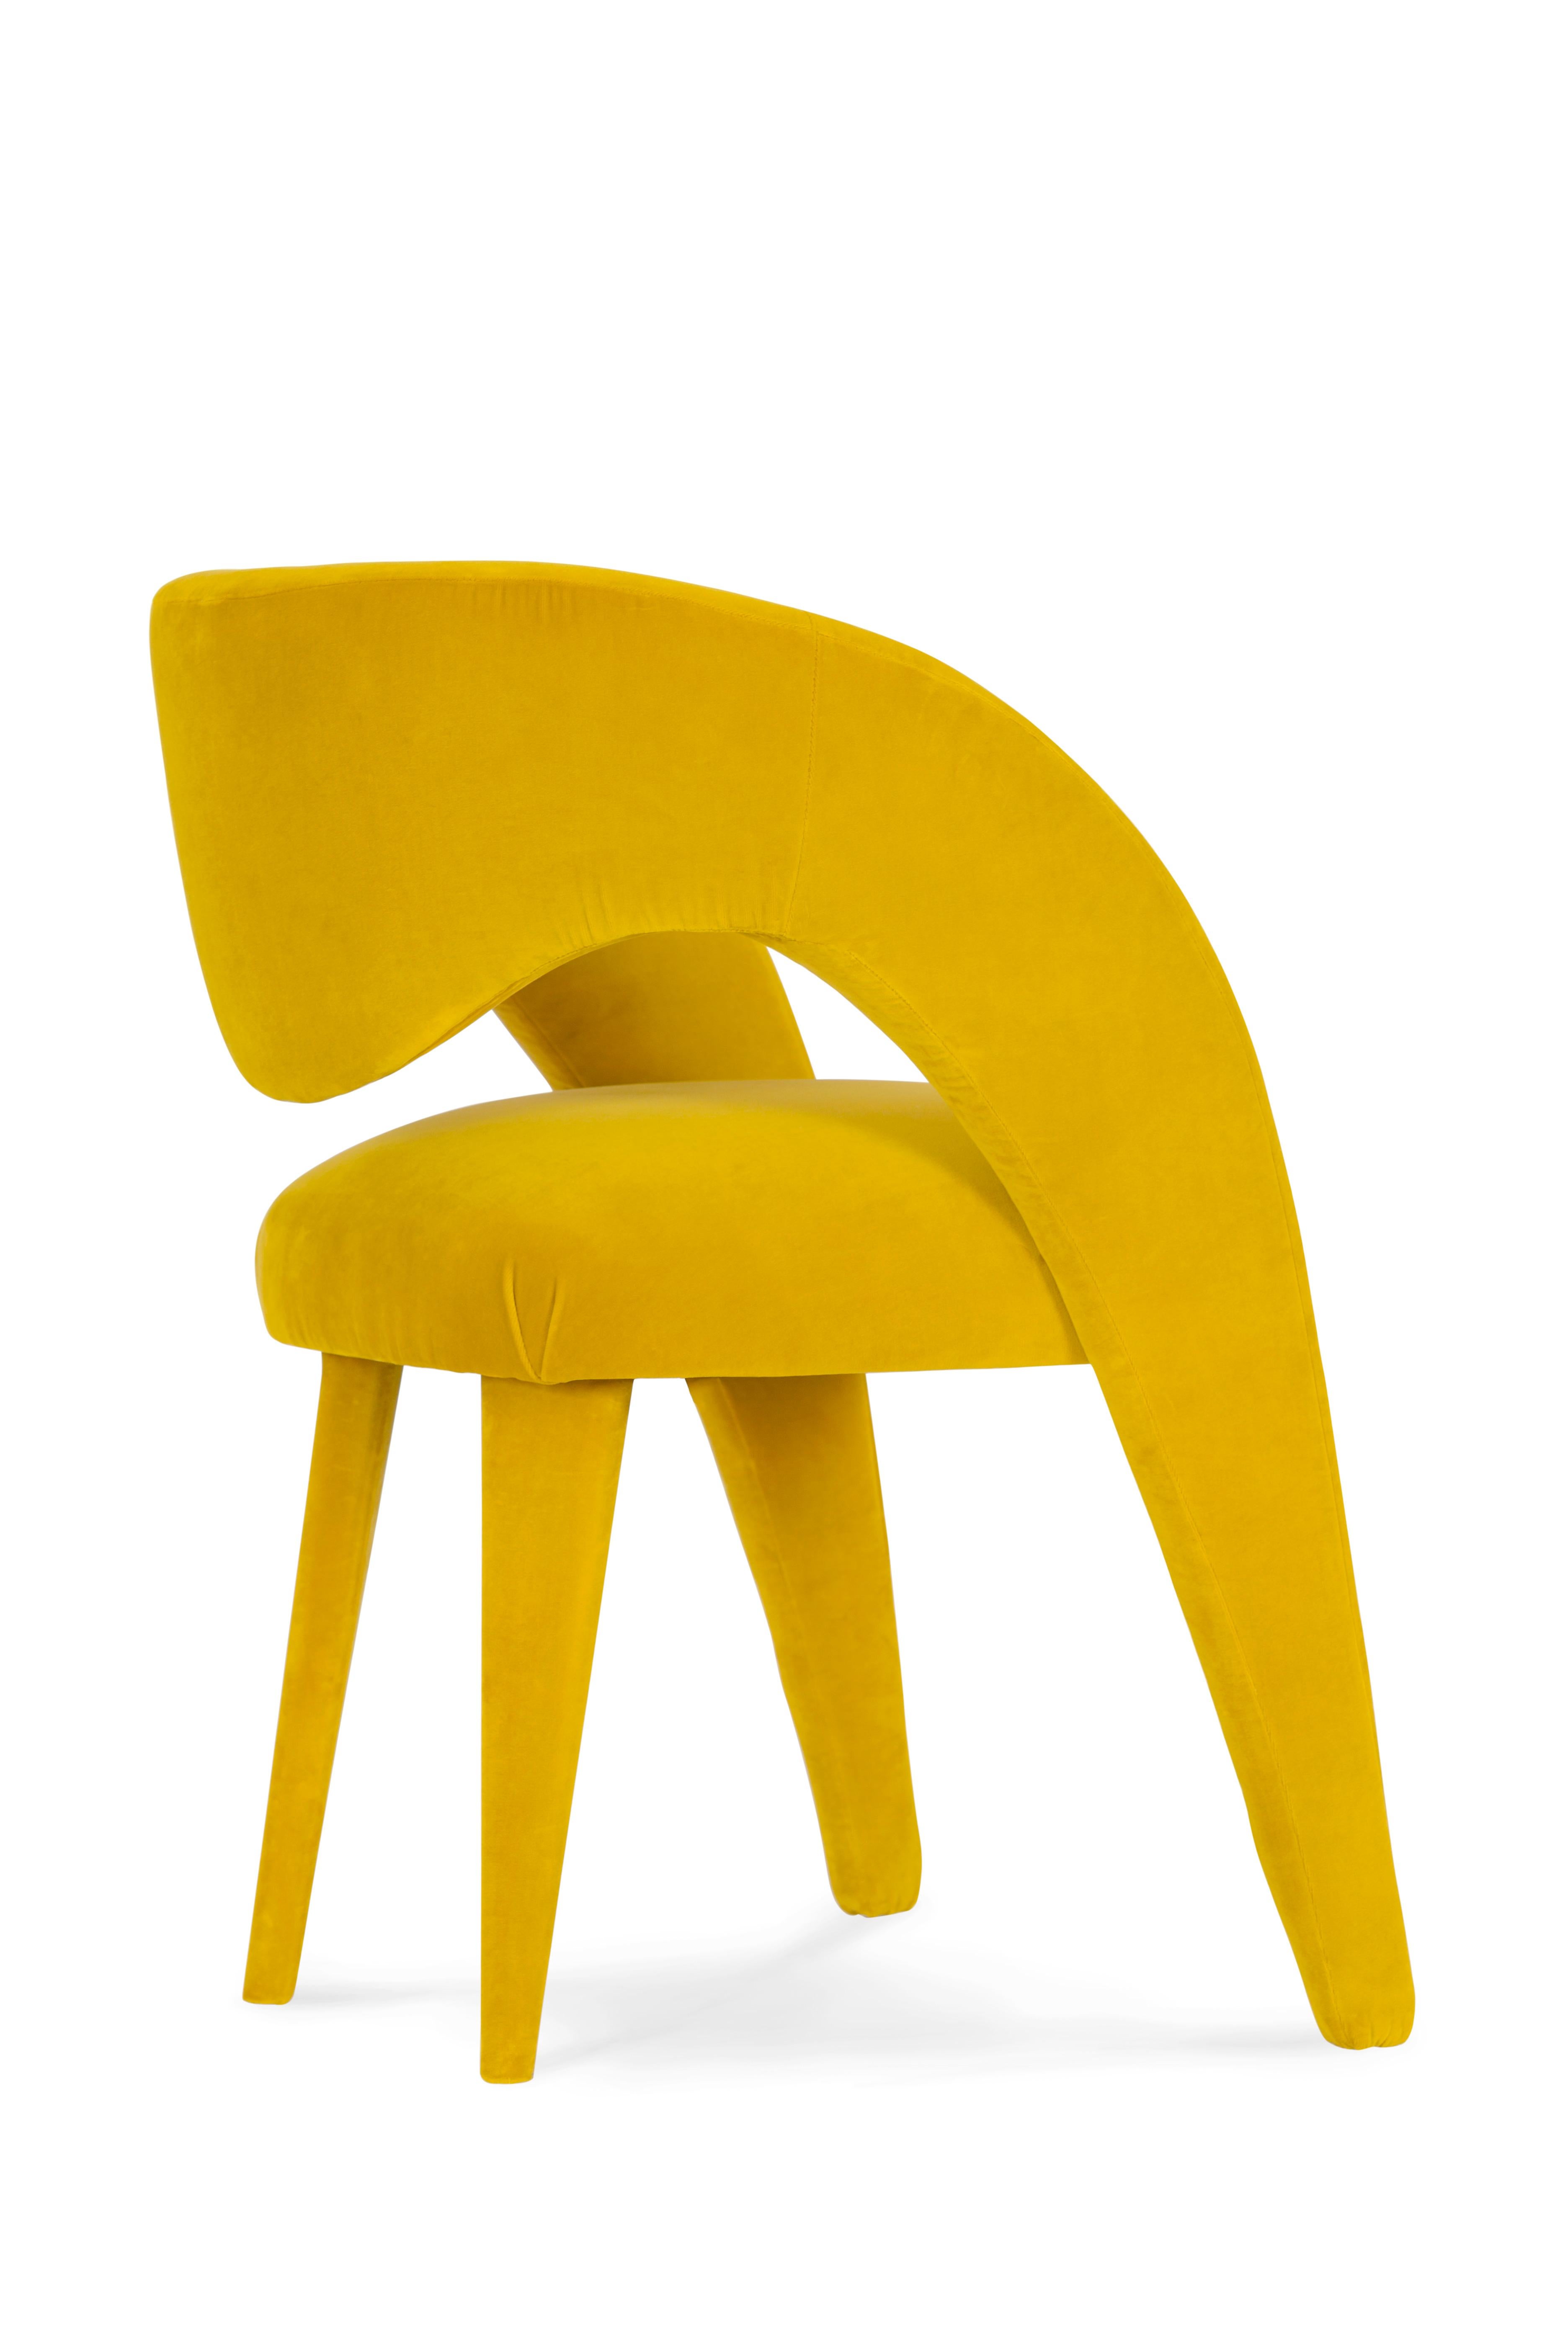 Velvet Chair w/arms laurence M by Green Apple
Dimensions: H 81 x W 56 x D 55 cm
Materials: wood, velvet.

Wooden chair with armrests fully upholstered in yellow cotton velvet.

Greenapple is one of Europe's most desirable furniture brands,